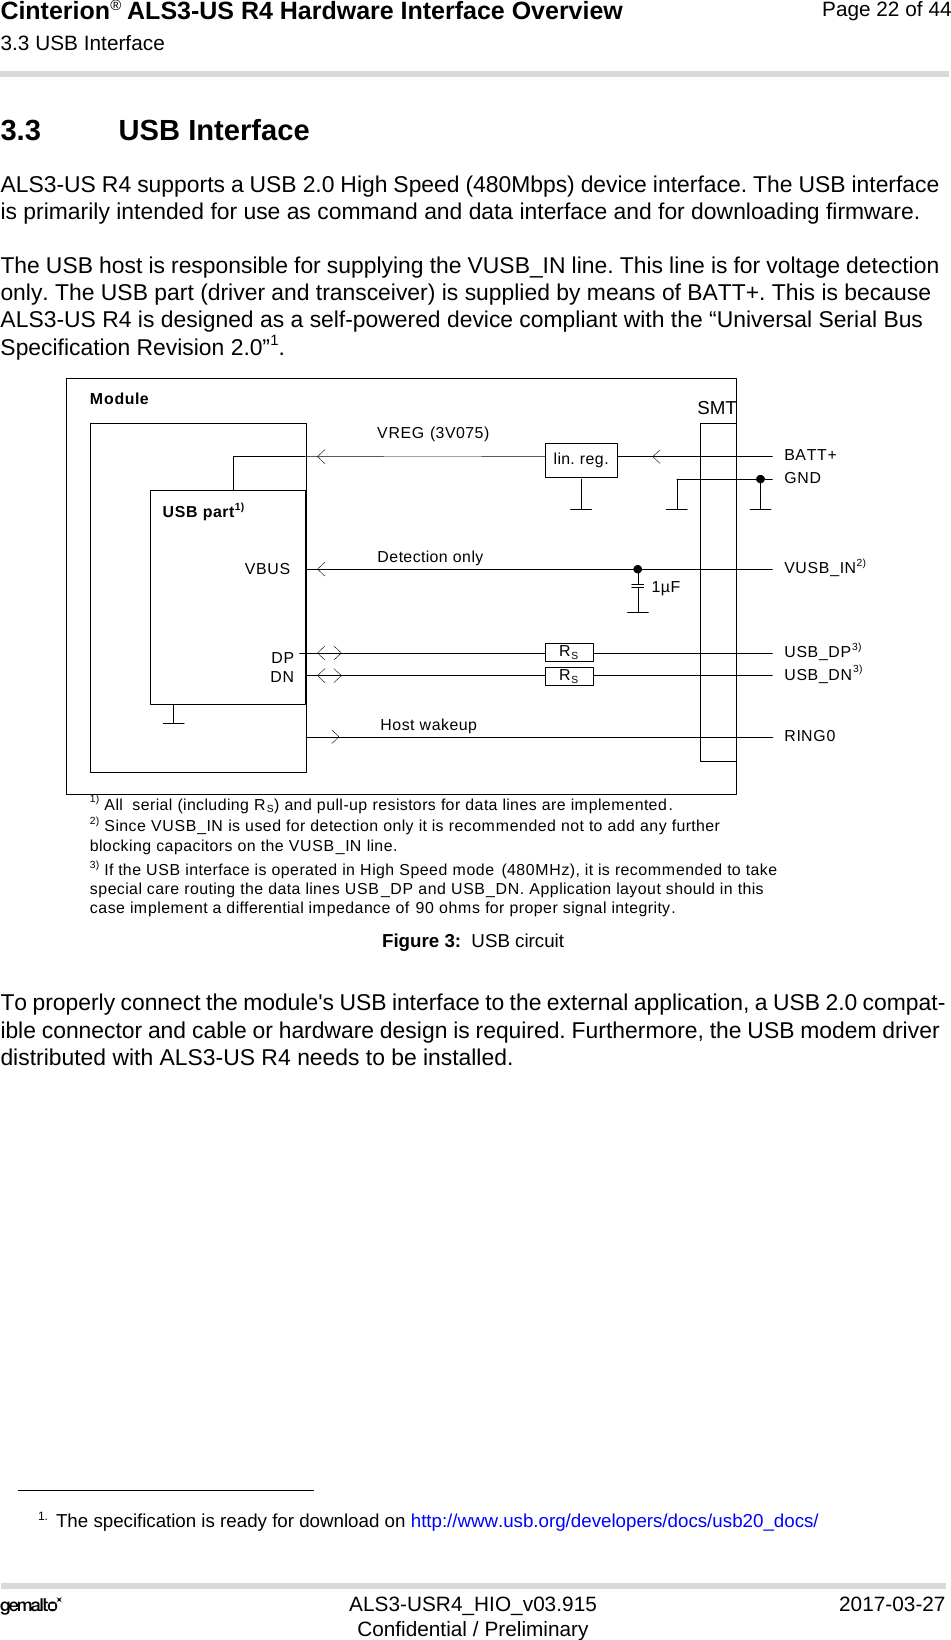 Cinterion® ALS3-US R4 Hardware Interface Overview3.3 USB Interface27ALS3-USR4_HIO_v03.915 2017-03-27Confidential / PreliminaryPage 22 of 443.3 USB InterfaceALS3-US R4 supports a USB 2.0 High Speed (480Mbps) device interface. The USB interface is primarily intended for use as command and data interface and for downloading firmware. The USB host is responsible for supplying the VUSB_IN line. This line is for voltage detection only. The USB part (driver and transceiver) is supplied by means of BATT+. This is because ALS3-US R4 is designed as a self-powered device compliant with the “Universal Serial Bus Specification Revision 2.0”1.Figure 3:  USB circuitTo properly connect the module&apos;s USB interface to the external application, a USB 2.0 compat-ible connector and cable or hardware design is required. Furthermore, the USB modem driver distributed with ALS3-US R4 needs to be installed.1. The specification is ready for download on http://www.usb.org/developers/docs/usb20_docs/DPDNVREG (3V075)BATT+USB_DP3)lin. reg. GNDModuleDetection only VUSB_IN2)USB part1)1) All  serial (including RS) and pull-up resistors for data lines are implemented.USB_DN3)3) If the USB interface is operated in High Speed mode  (480MHz), it is recommended to take special care routing the data lines USB_DP and USB_DN. Application layout should in this case implement a differential impedance of 90 ohms for proper signal integrity.RSRSVBUS 1µF2) Since VUSB_IN is used for detection only it is recommended not to add any further blocking capacitors on the VUSB_IN line.Host wakeup RING0SMT